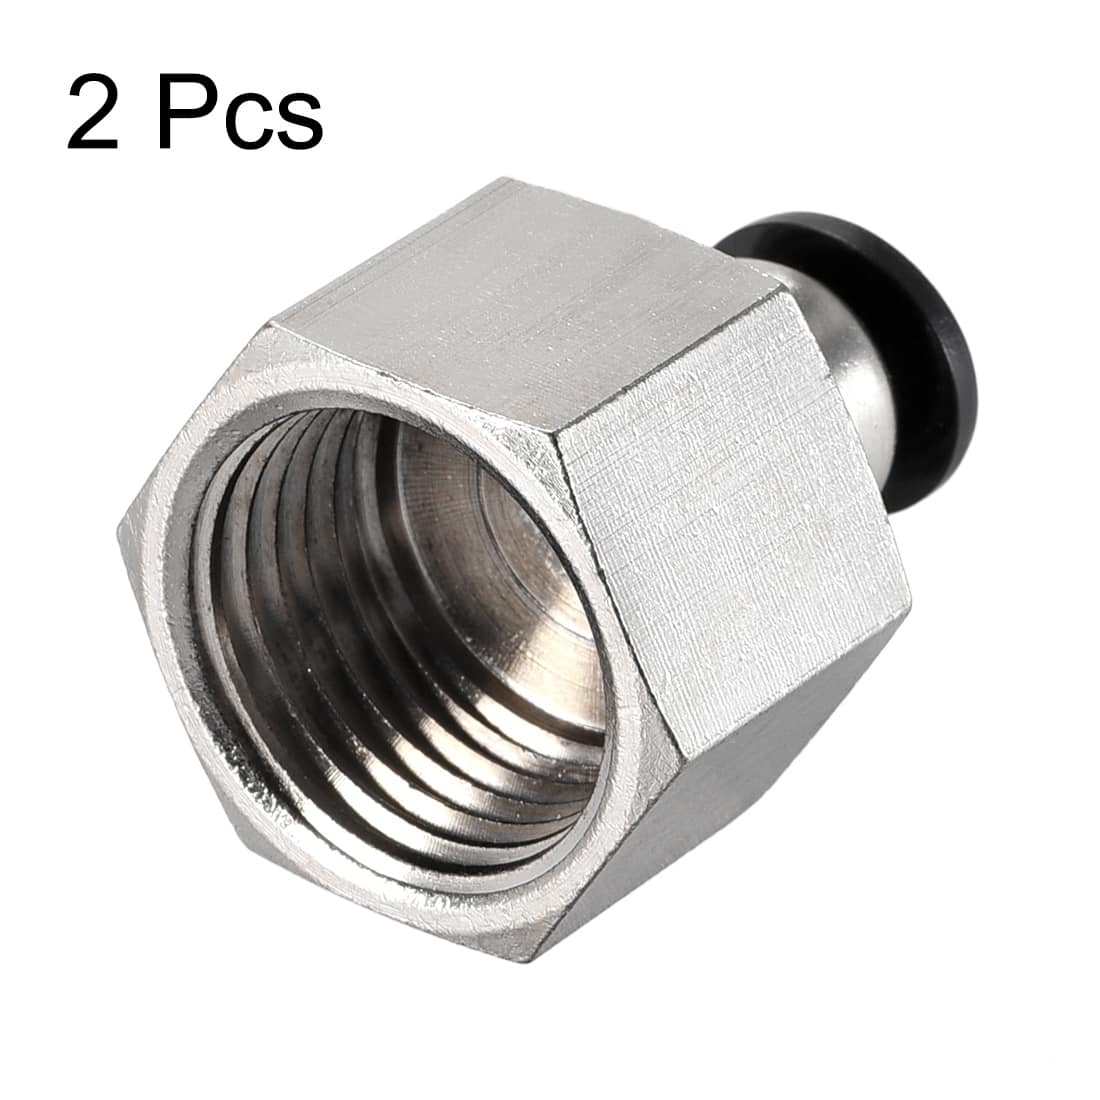 Push to Connect Tube Fitting Adapter 6mm OD x 1/2 NPT Straight Connecter 2pcs - Silver Tone,Black